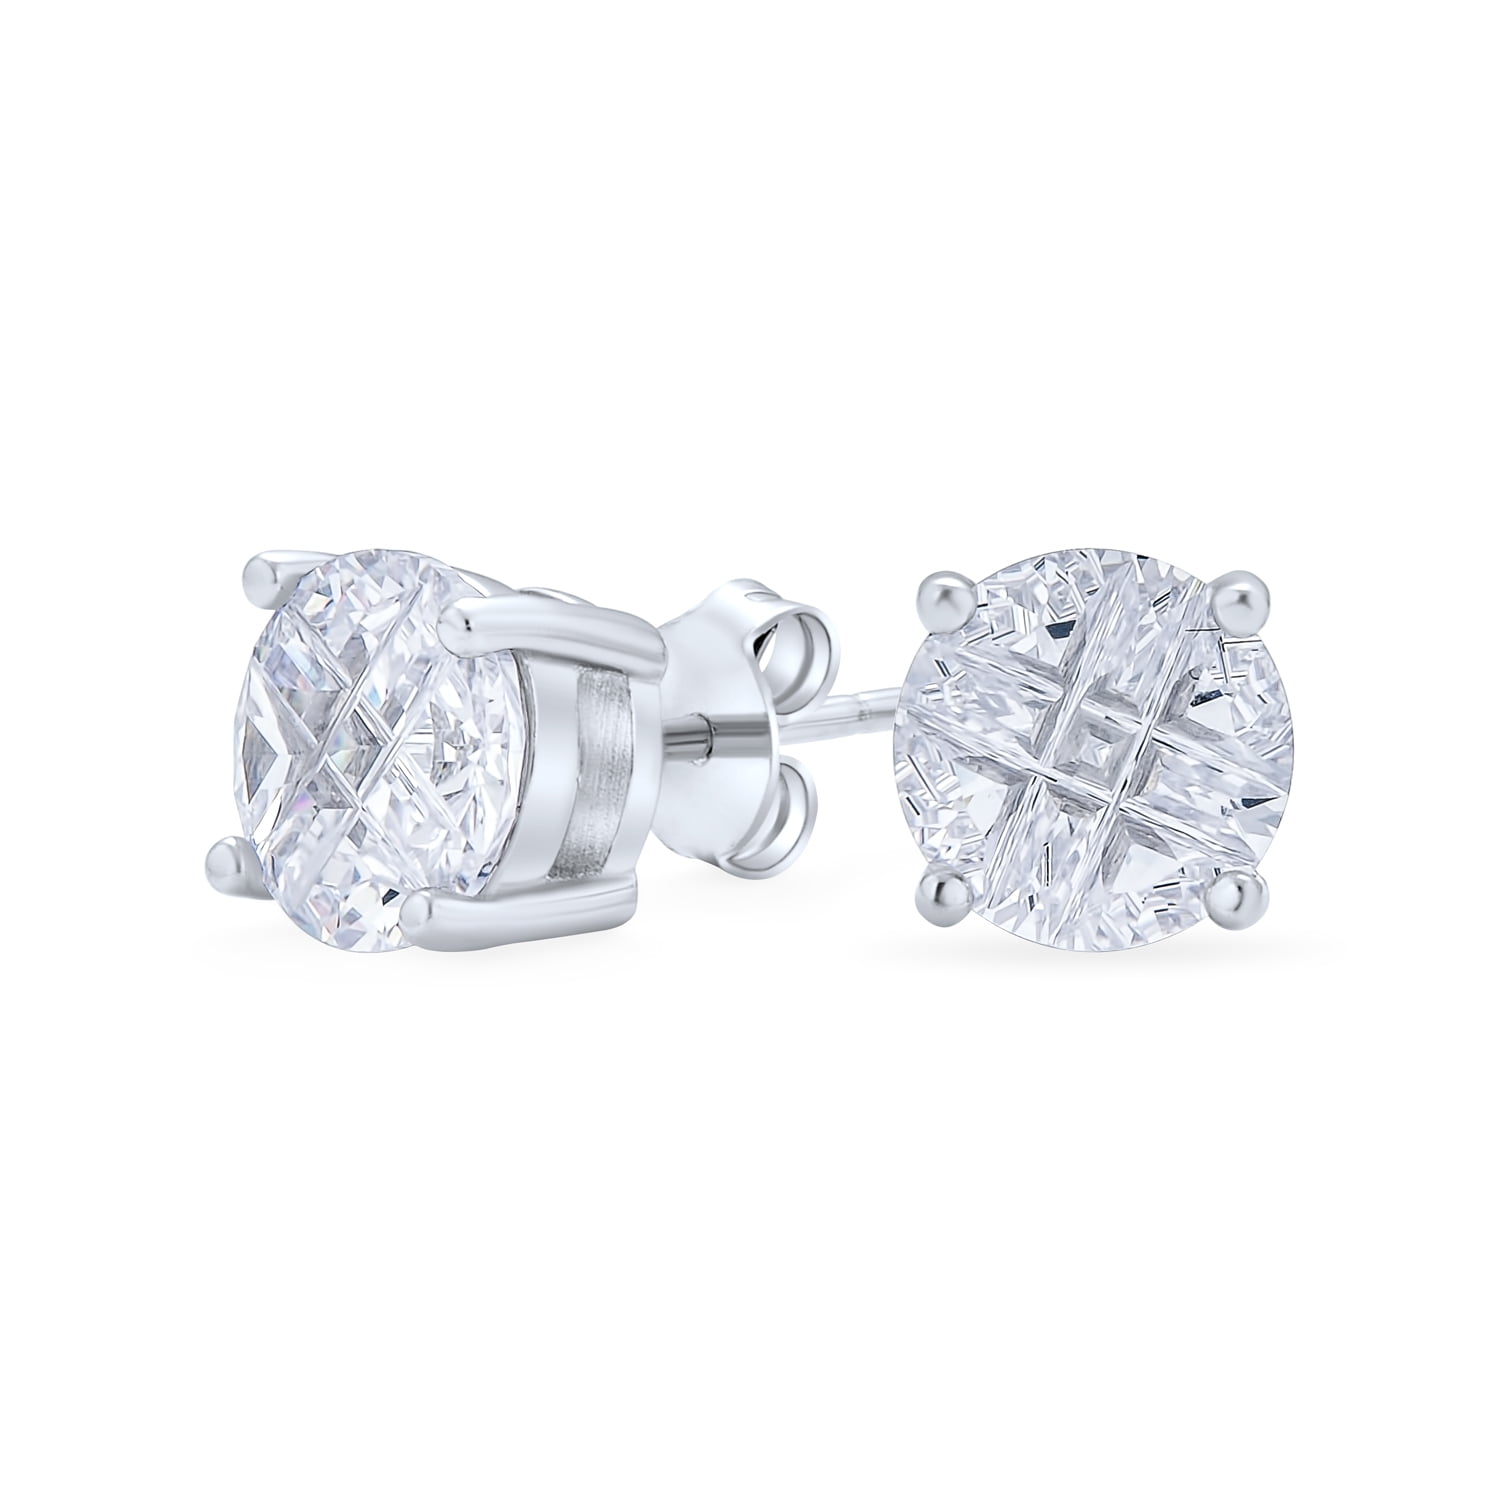 April Birthstone White CZ Stone Sterling Silver 5 mm x 5 mm Square Stone 4 Claw Stud Earring.